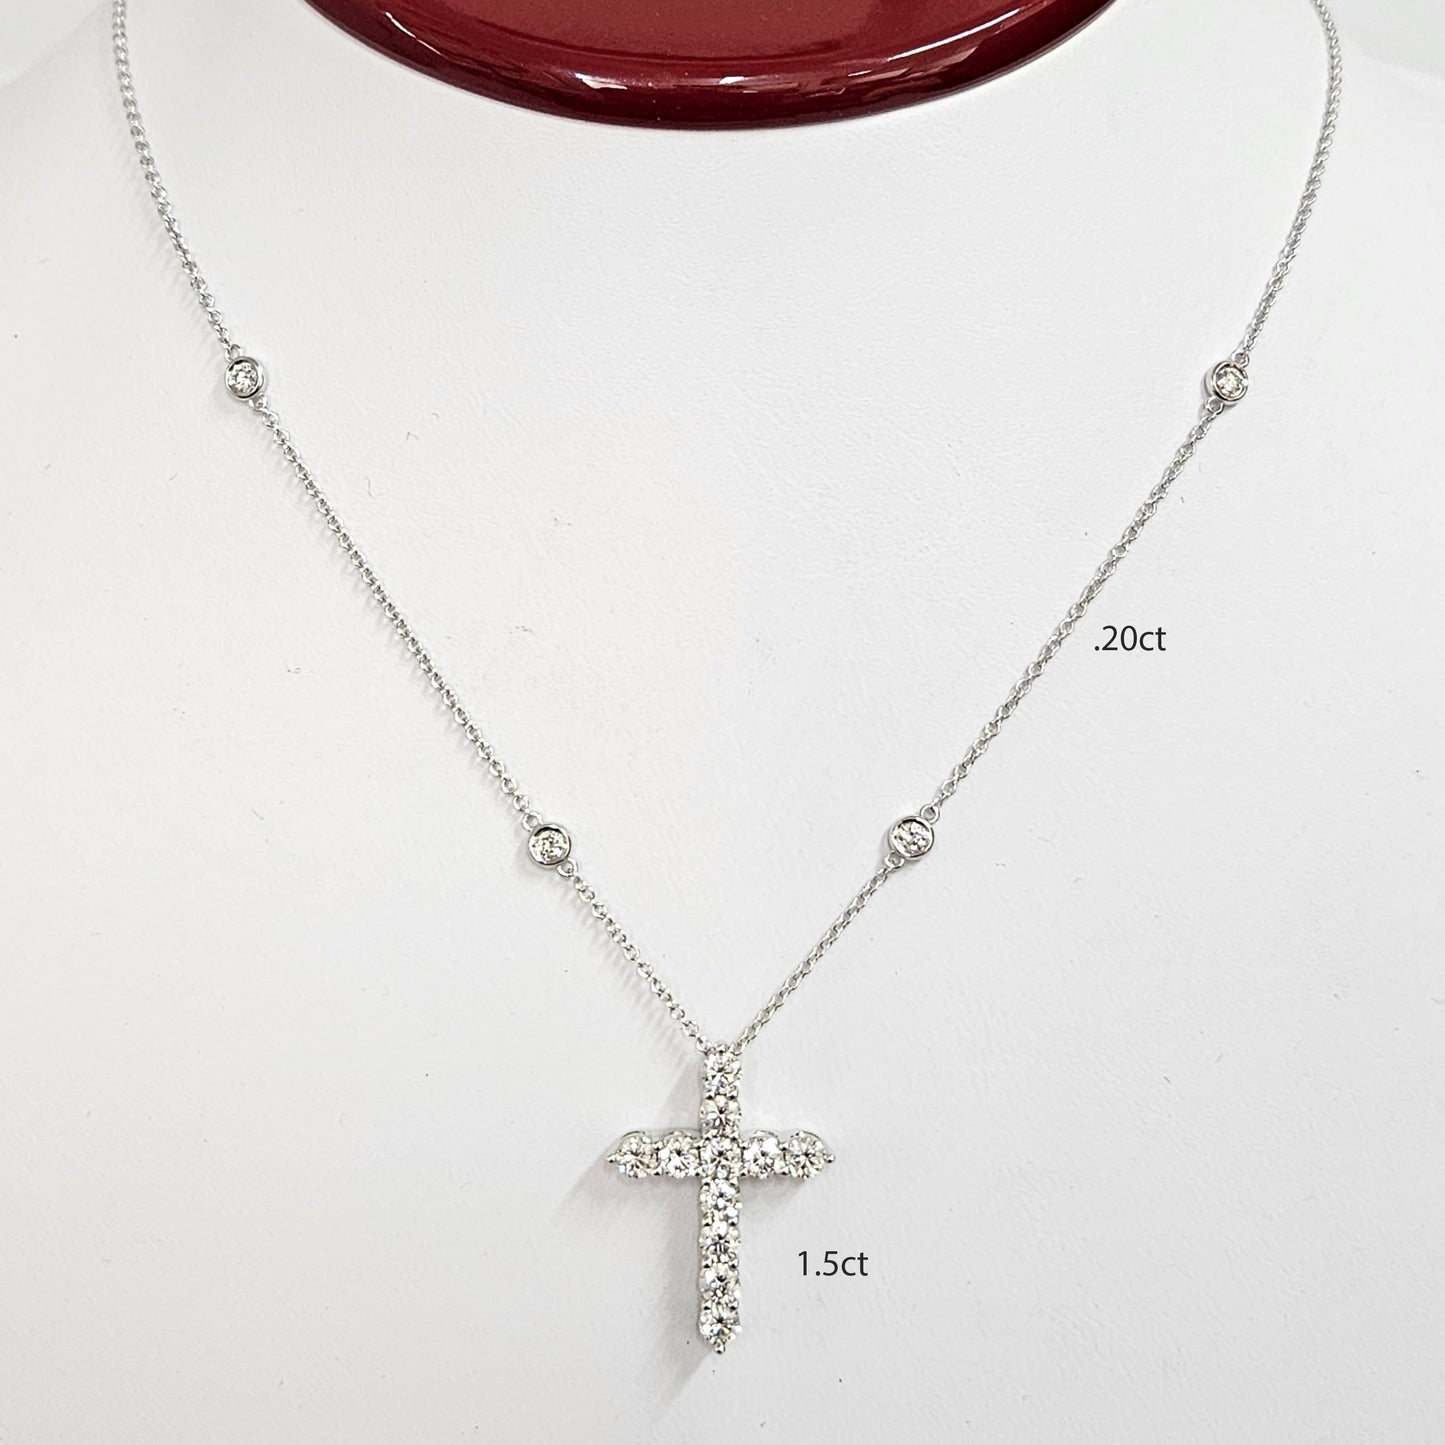 1.5ct Round Diamond Cross Necklace /Luxury Cross Necklace/ Religious/ 14K Gold Cross Necklace/ Adjustable Length/ Gift for Her